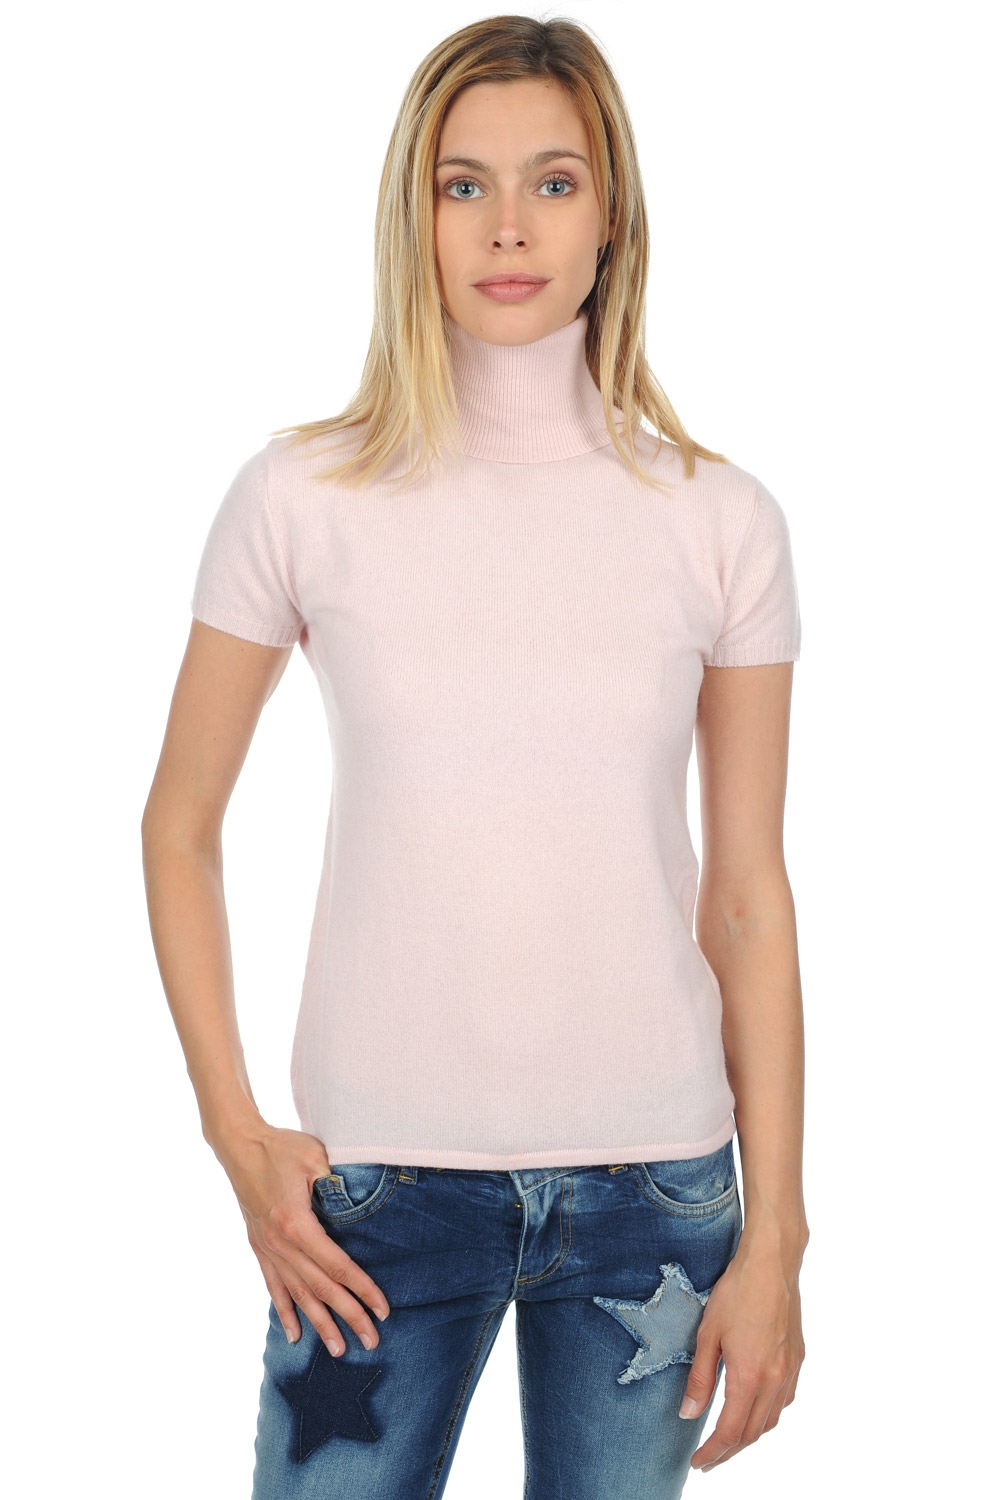 Cachemire pull femme col roule olivia rose pale 2xl